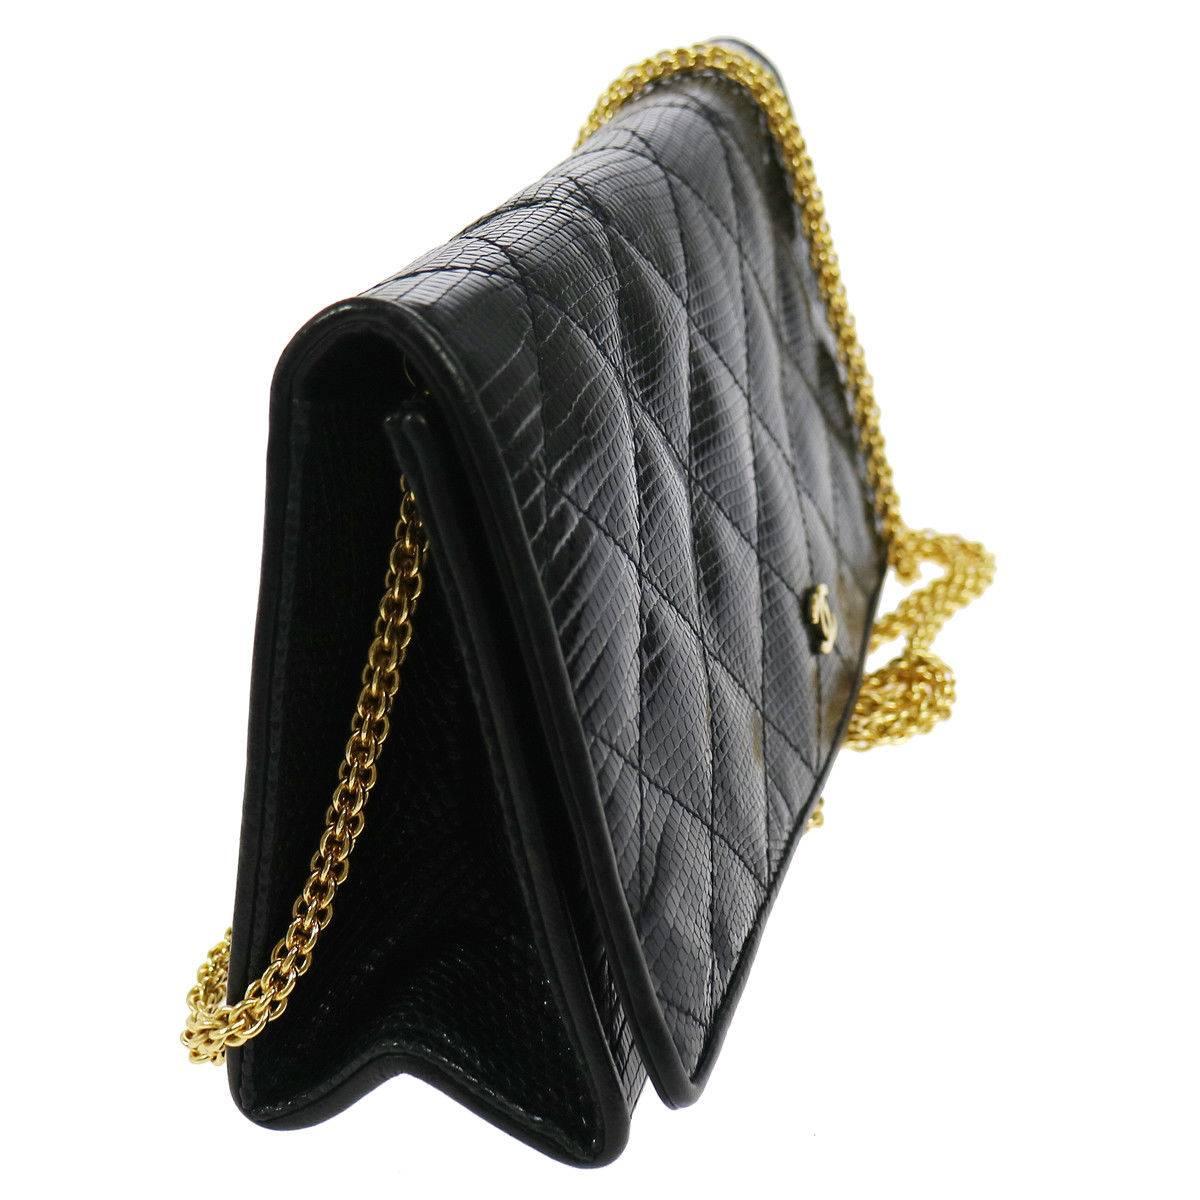 Chanel Black Lizard Leather Gold Chain 2 in 1 Clutch Flap Evening Shoulder Bag at Newfound Luxury 

Gold tone hardware
Snap button closure
Leather lining
Made in Italy
Chain strap drop 20"
Measures  9" W x 4" H x 2" D 